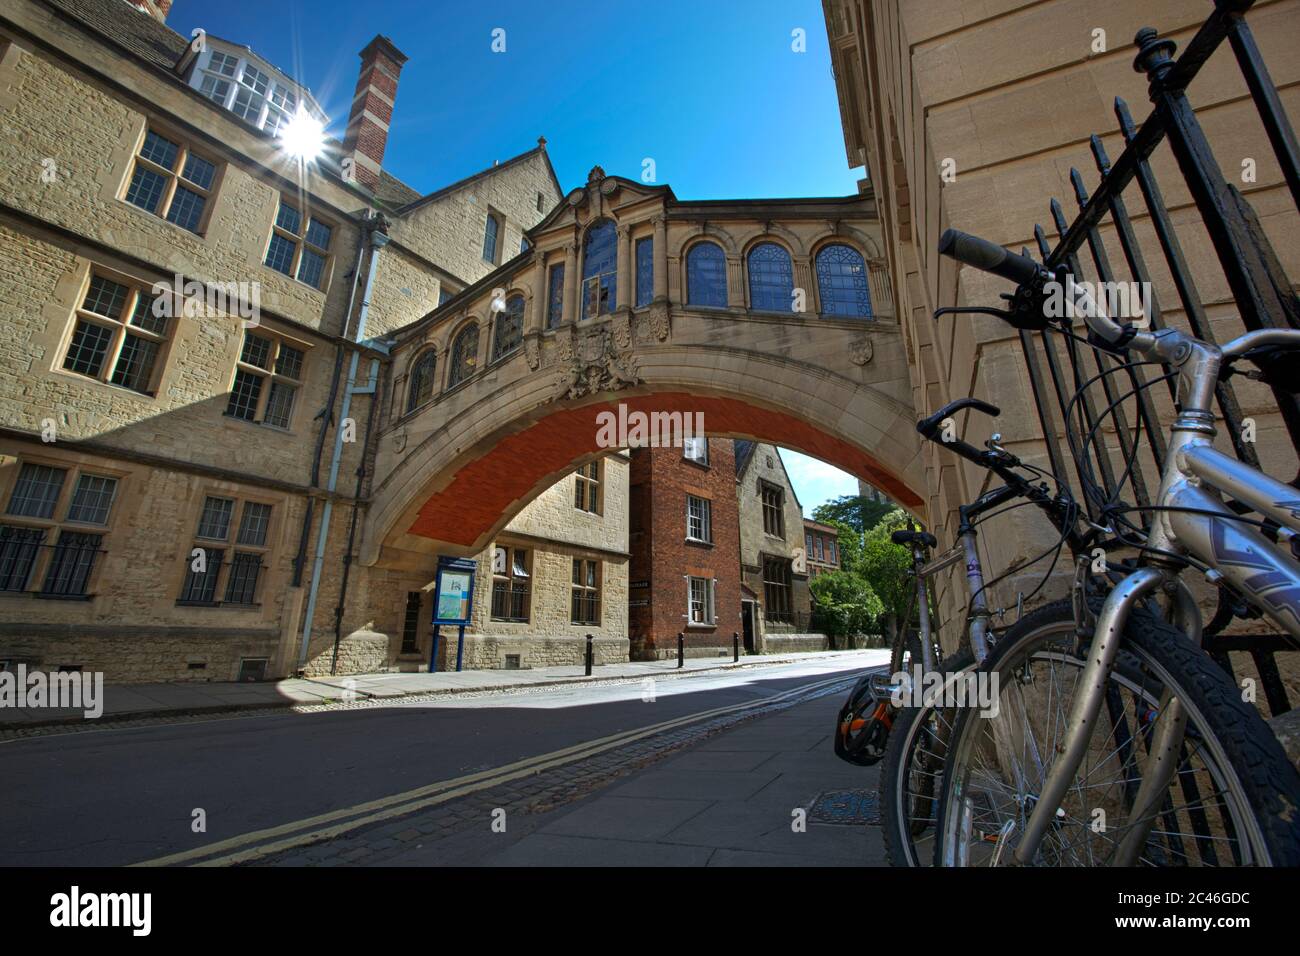 The Bridge of Sighs over New College Lane (a 1914 copy of the famous bridge in Venice), Oxford, Oxfordshire, England, United Kingdom, Europe Stock Photo